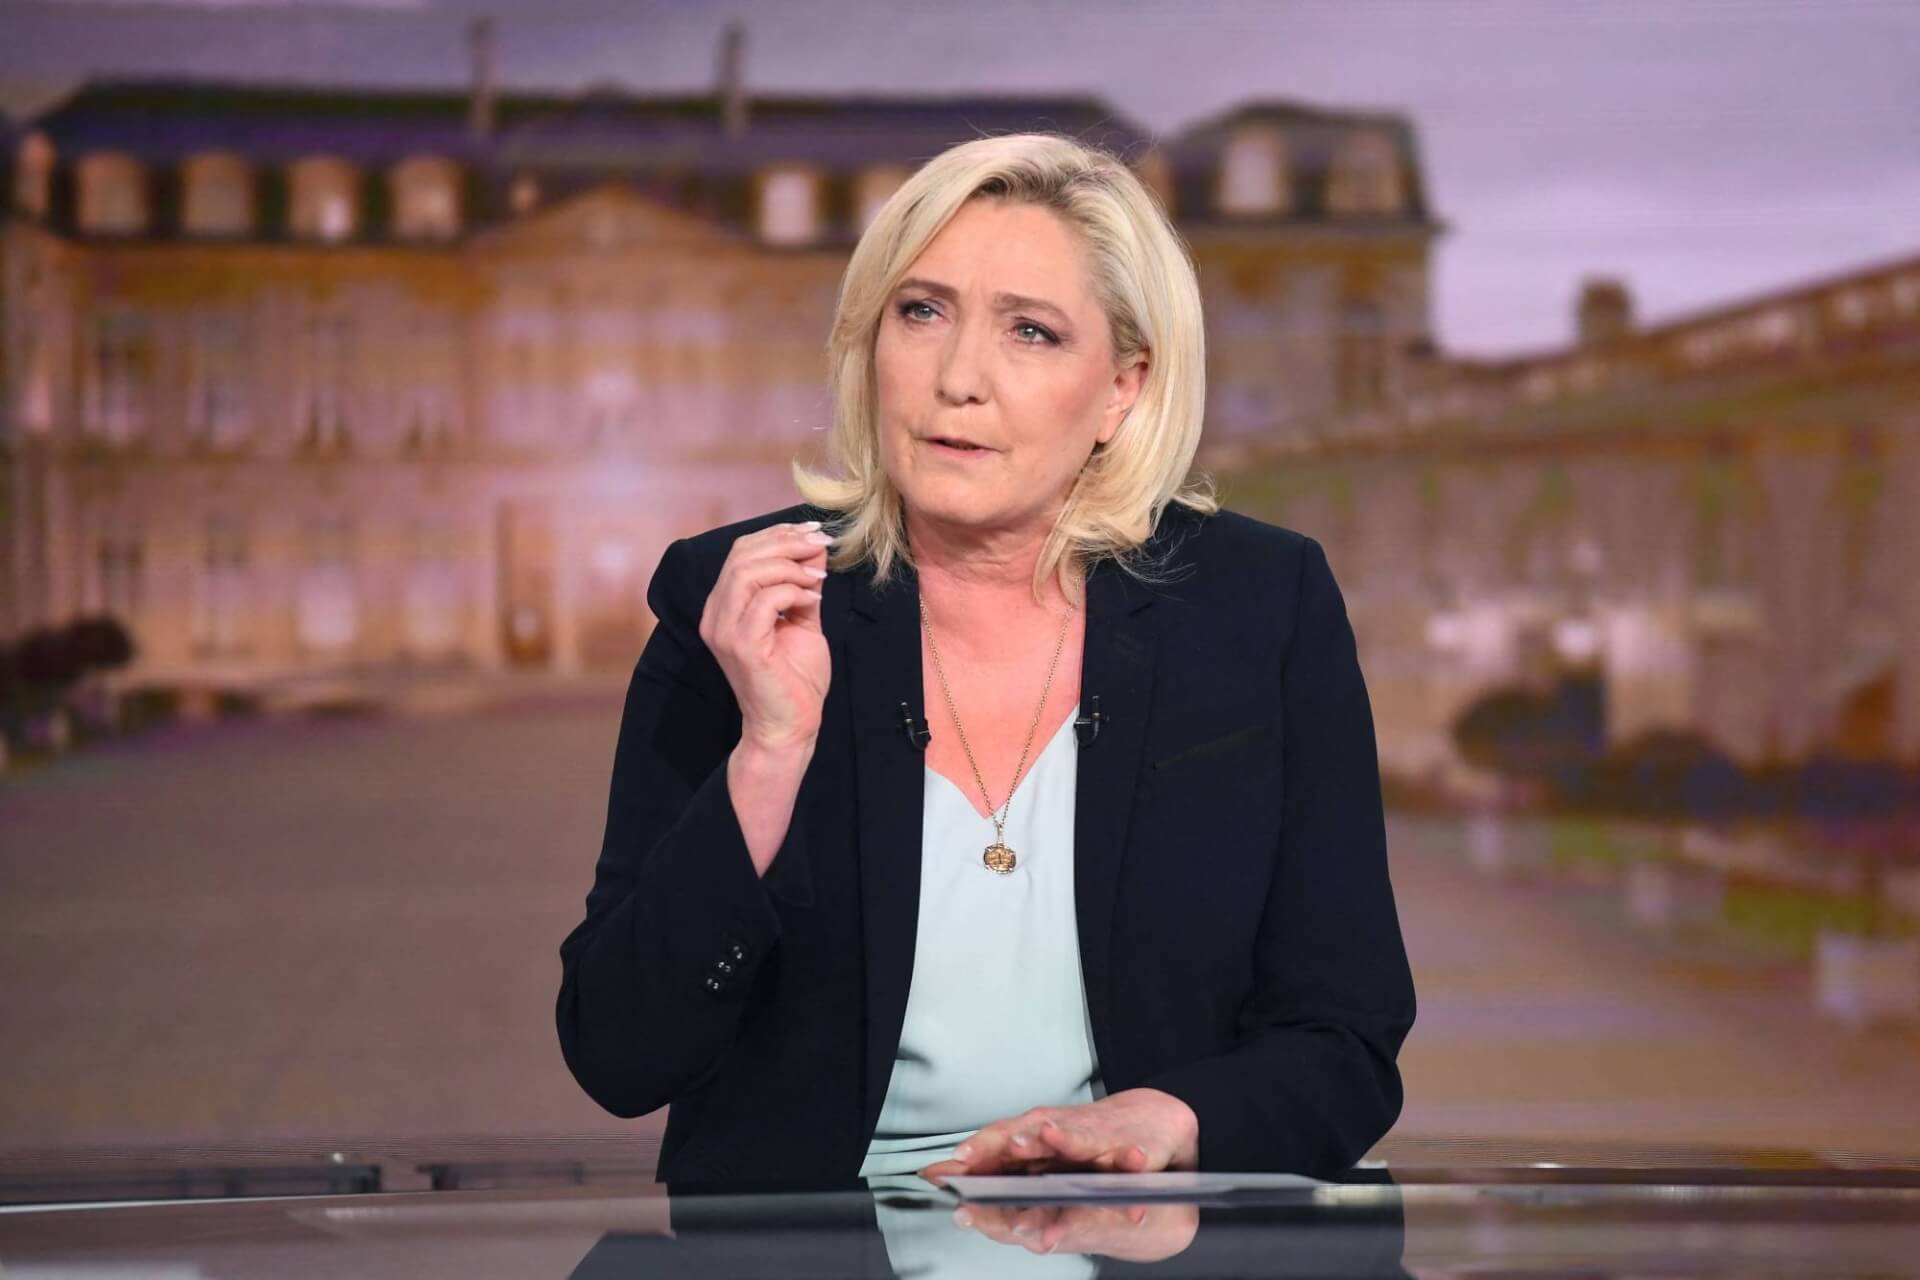 France: Far-Right Candidate Le Pen Vows to Pursue Closer Ties With Russia to Counter China